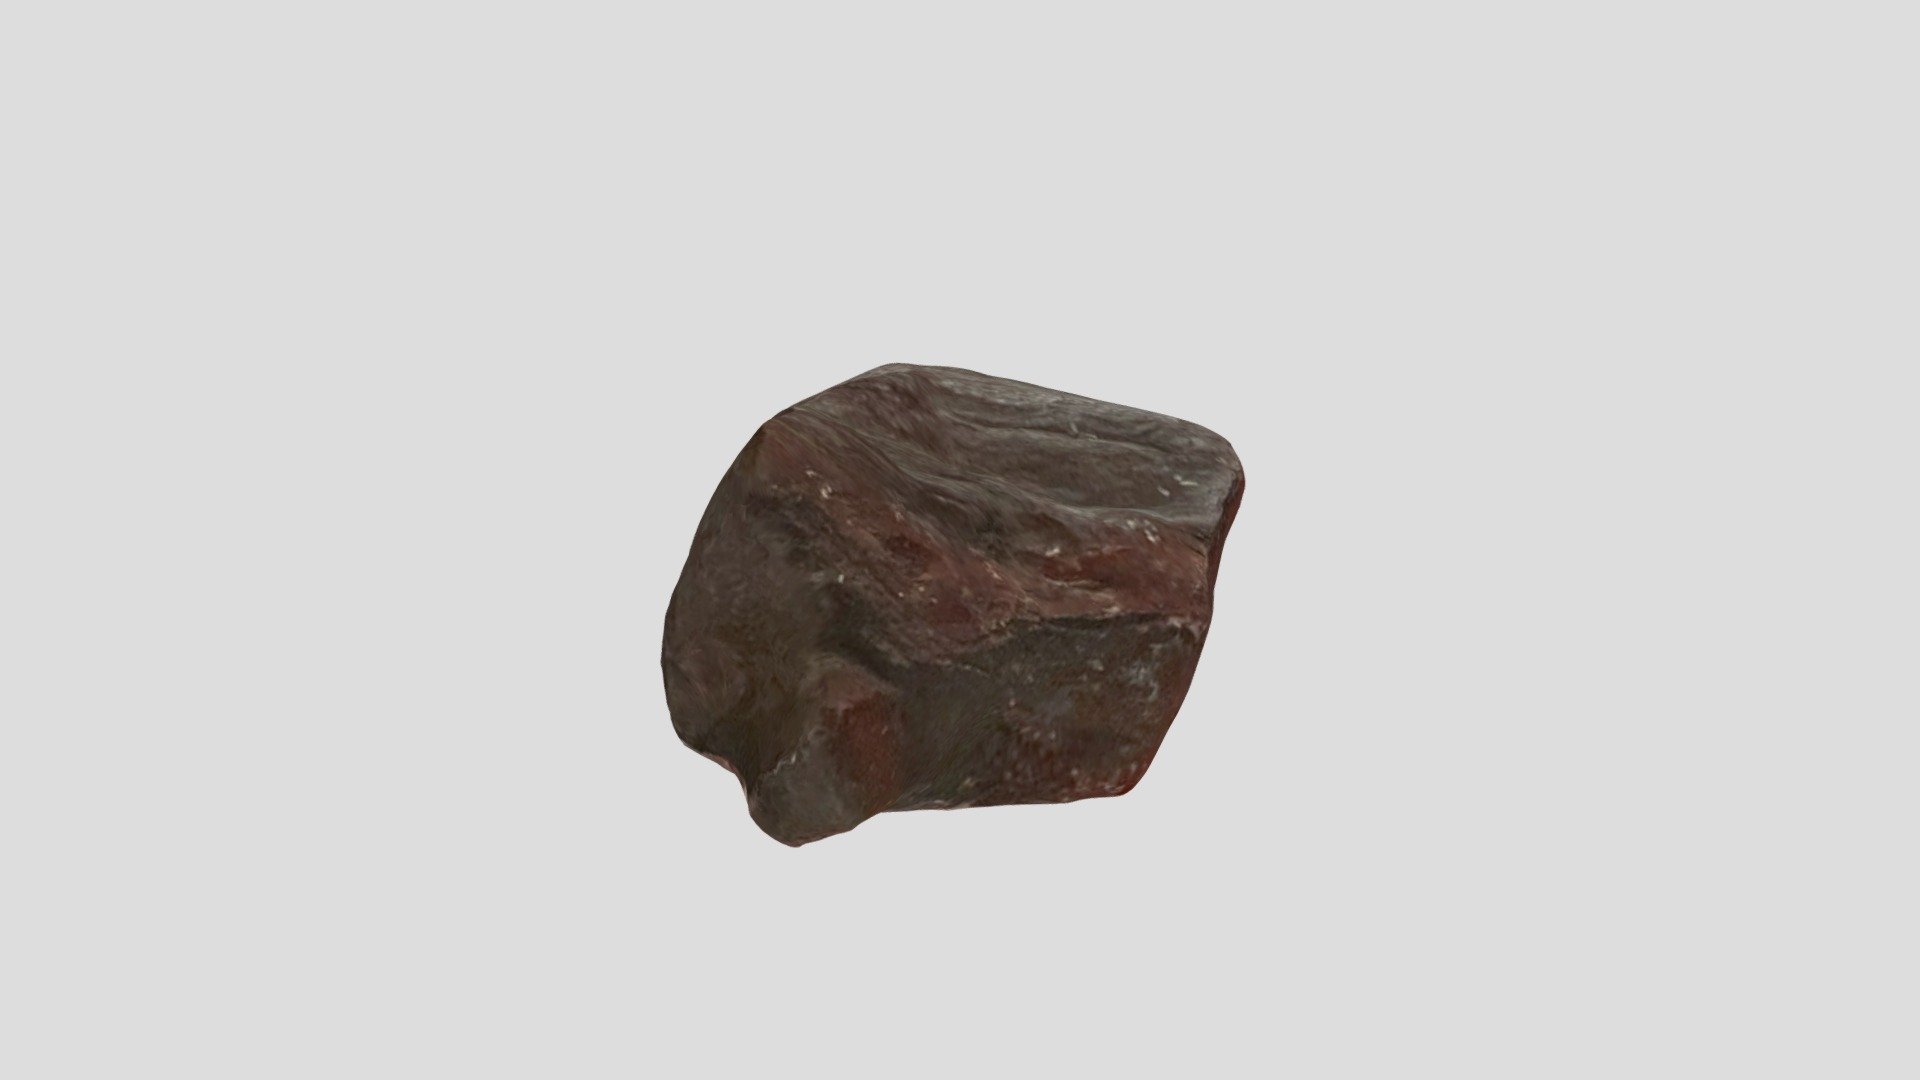 Banded Iron Formation (BIF)